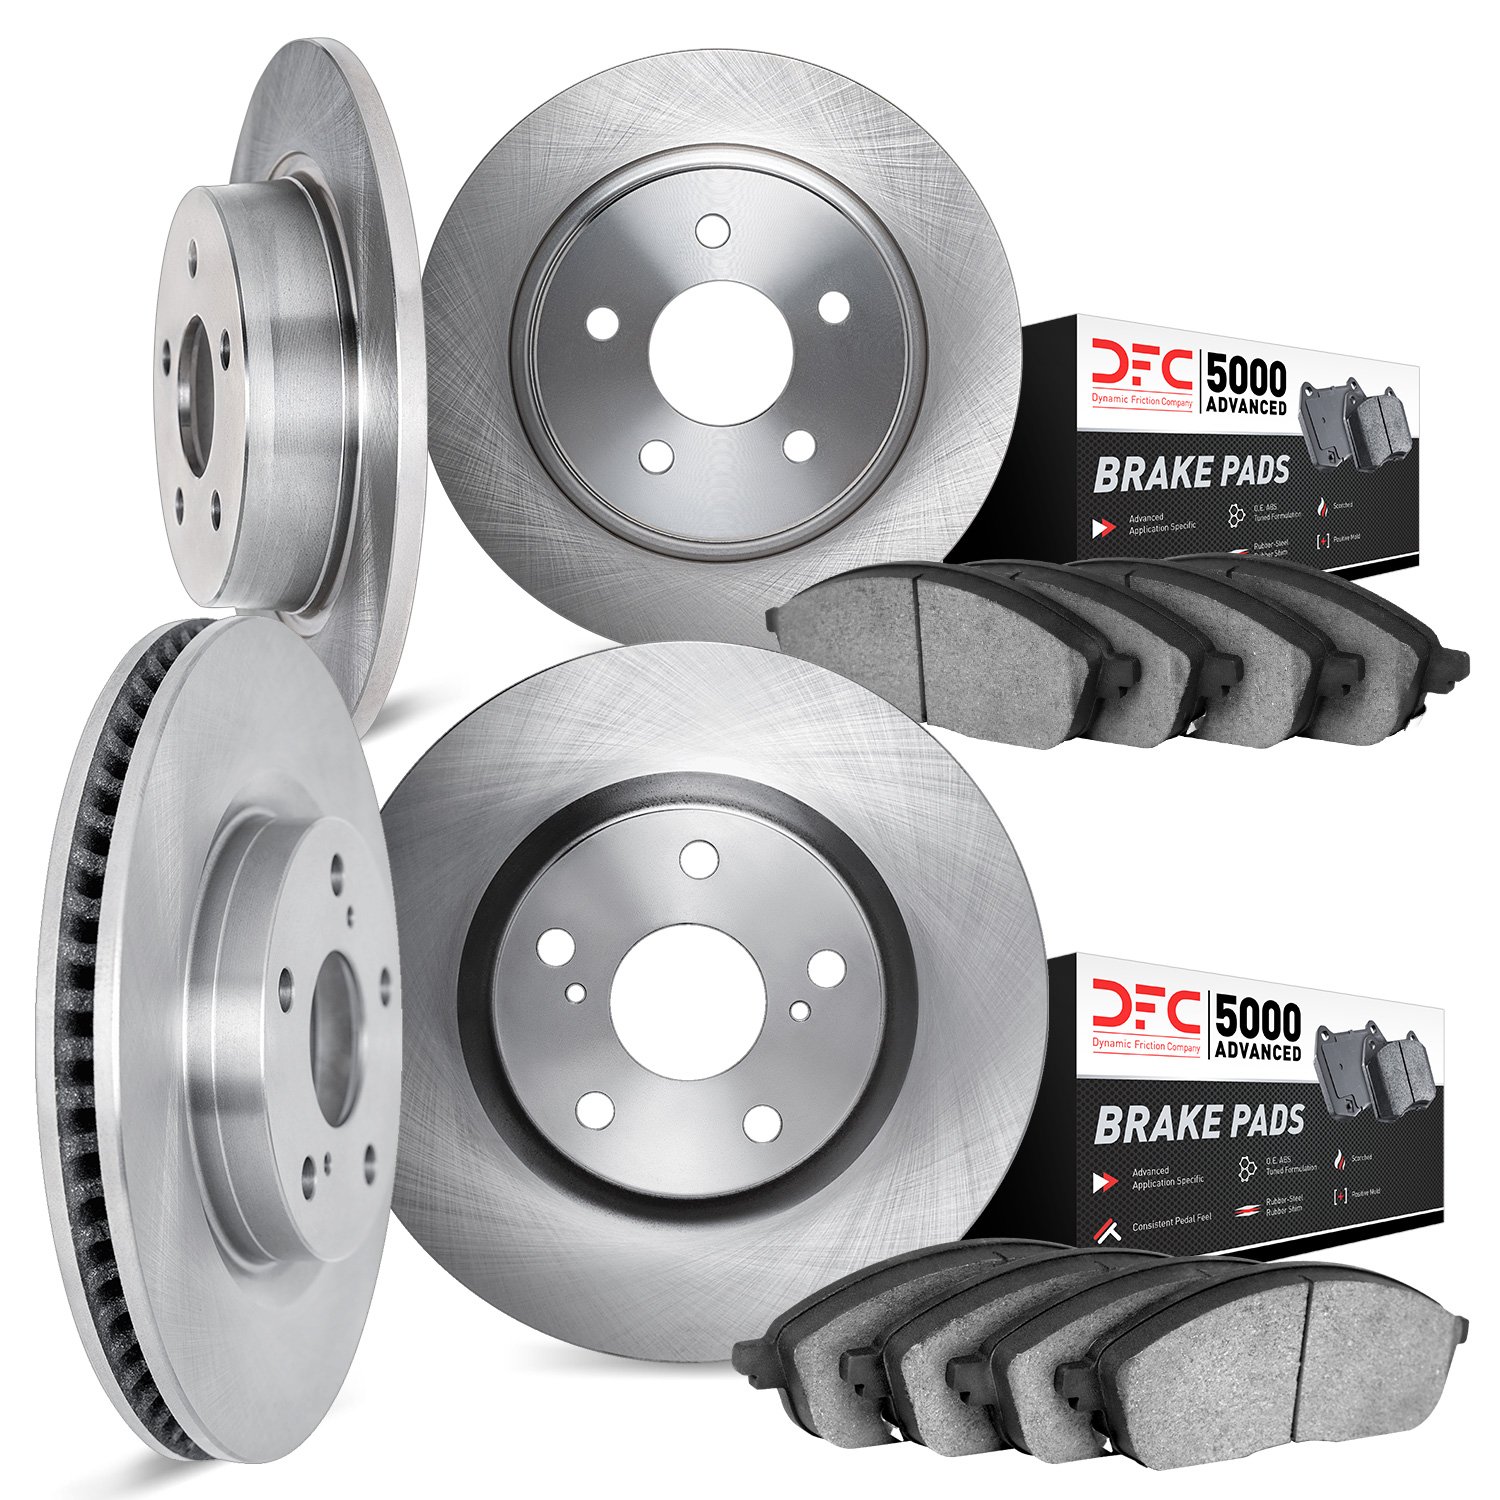 6504-76401 Brake Rotors w/5000 Advanced Brake Pads Kit, Fits Select Lexus/Toyota/Scion, Position: Front and Rear